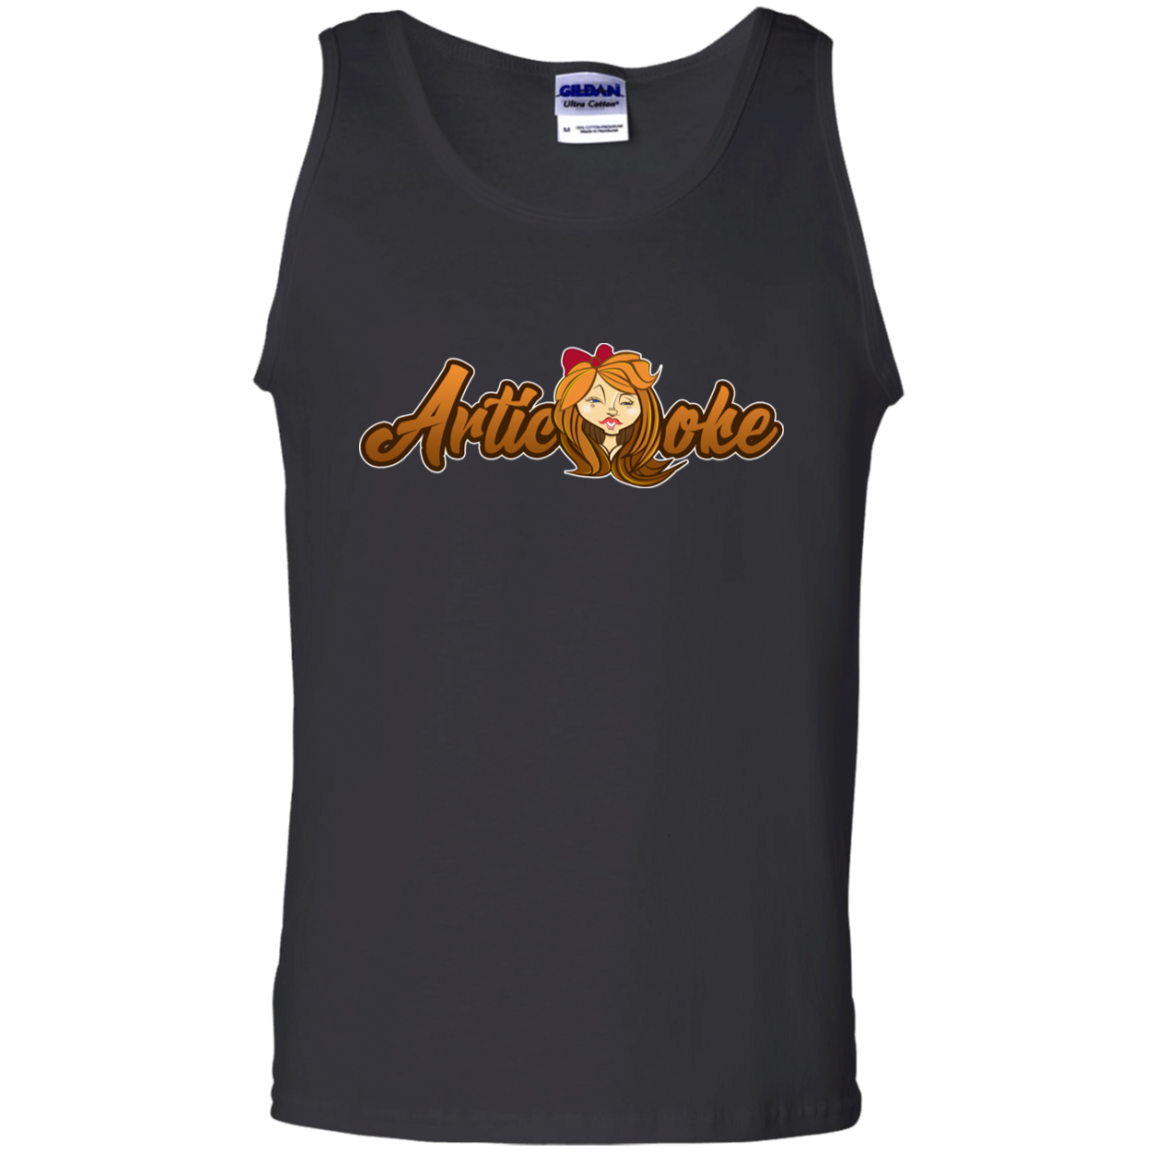 ZZ#21 Characters and Fonts. Aubrey. A show case of my characters and font styles. 100% Cotton Tank Top